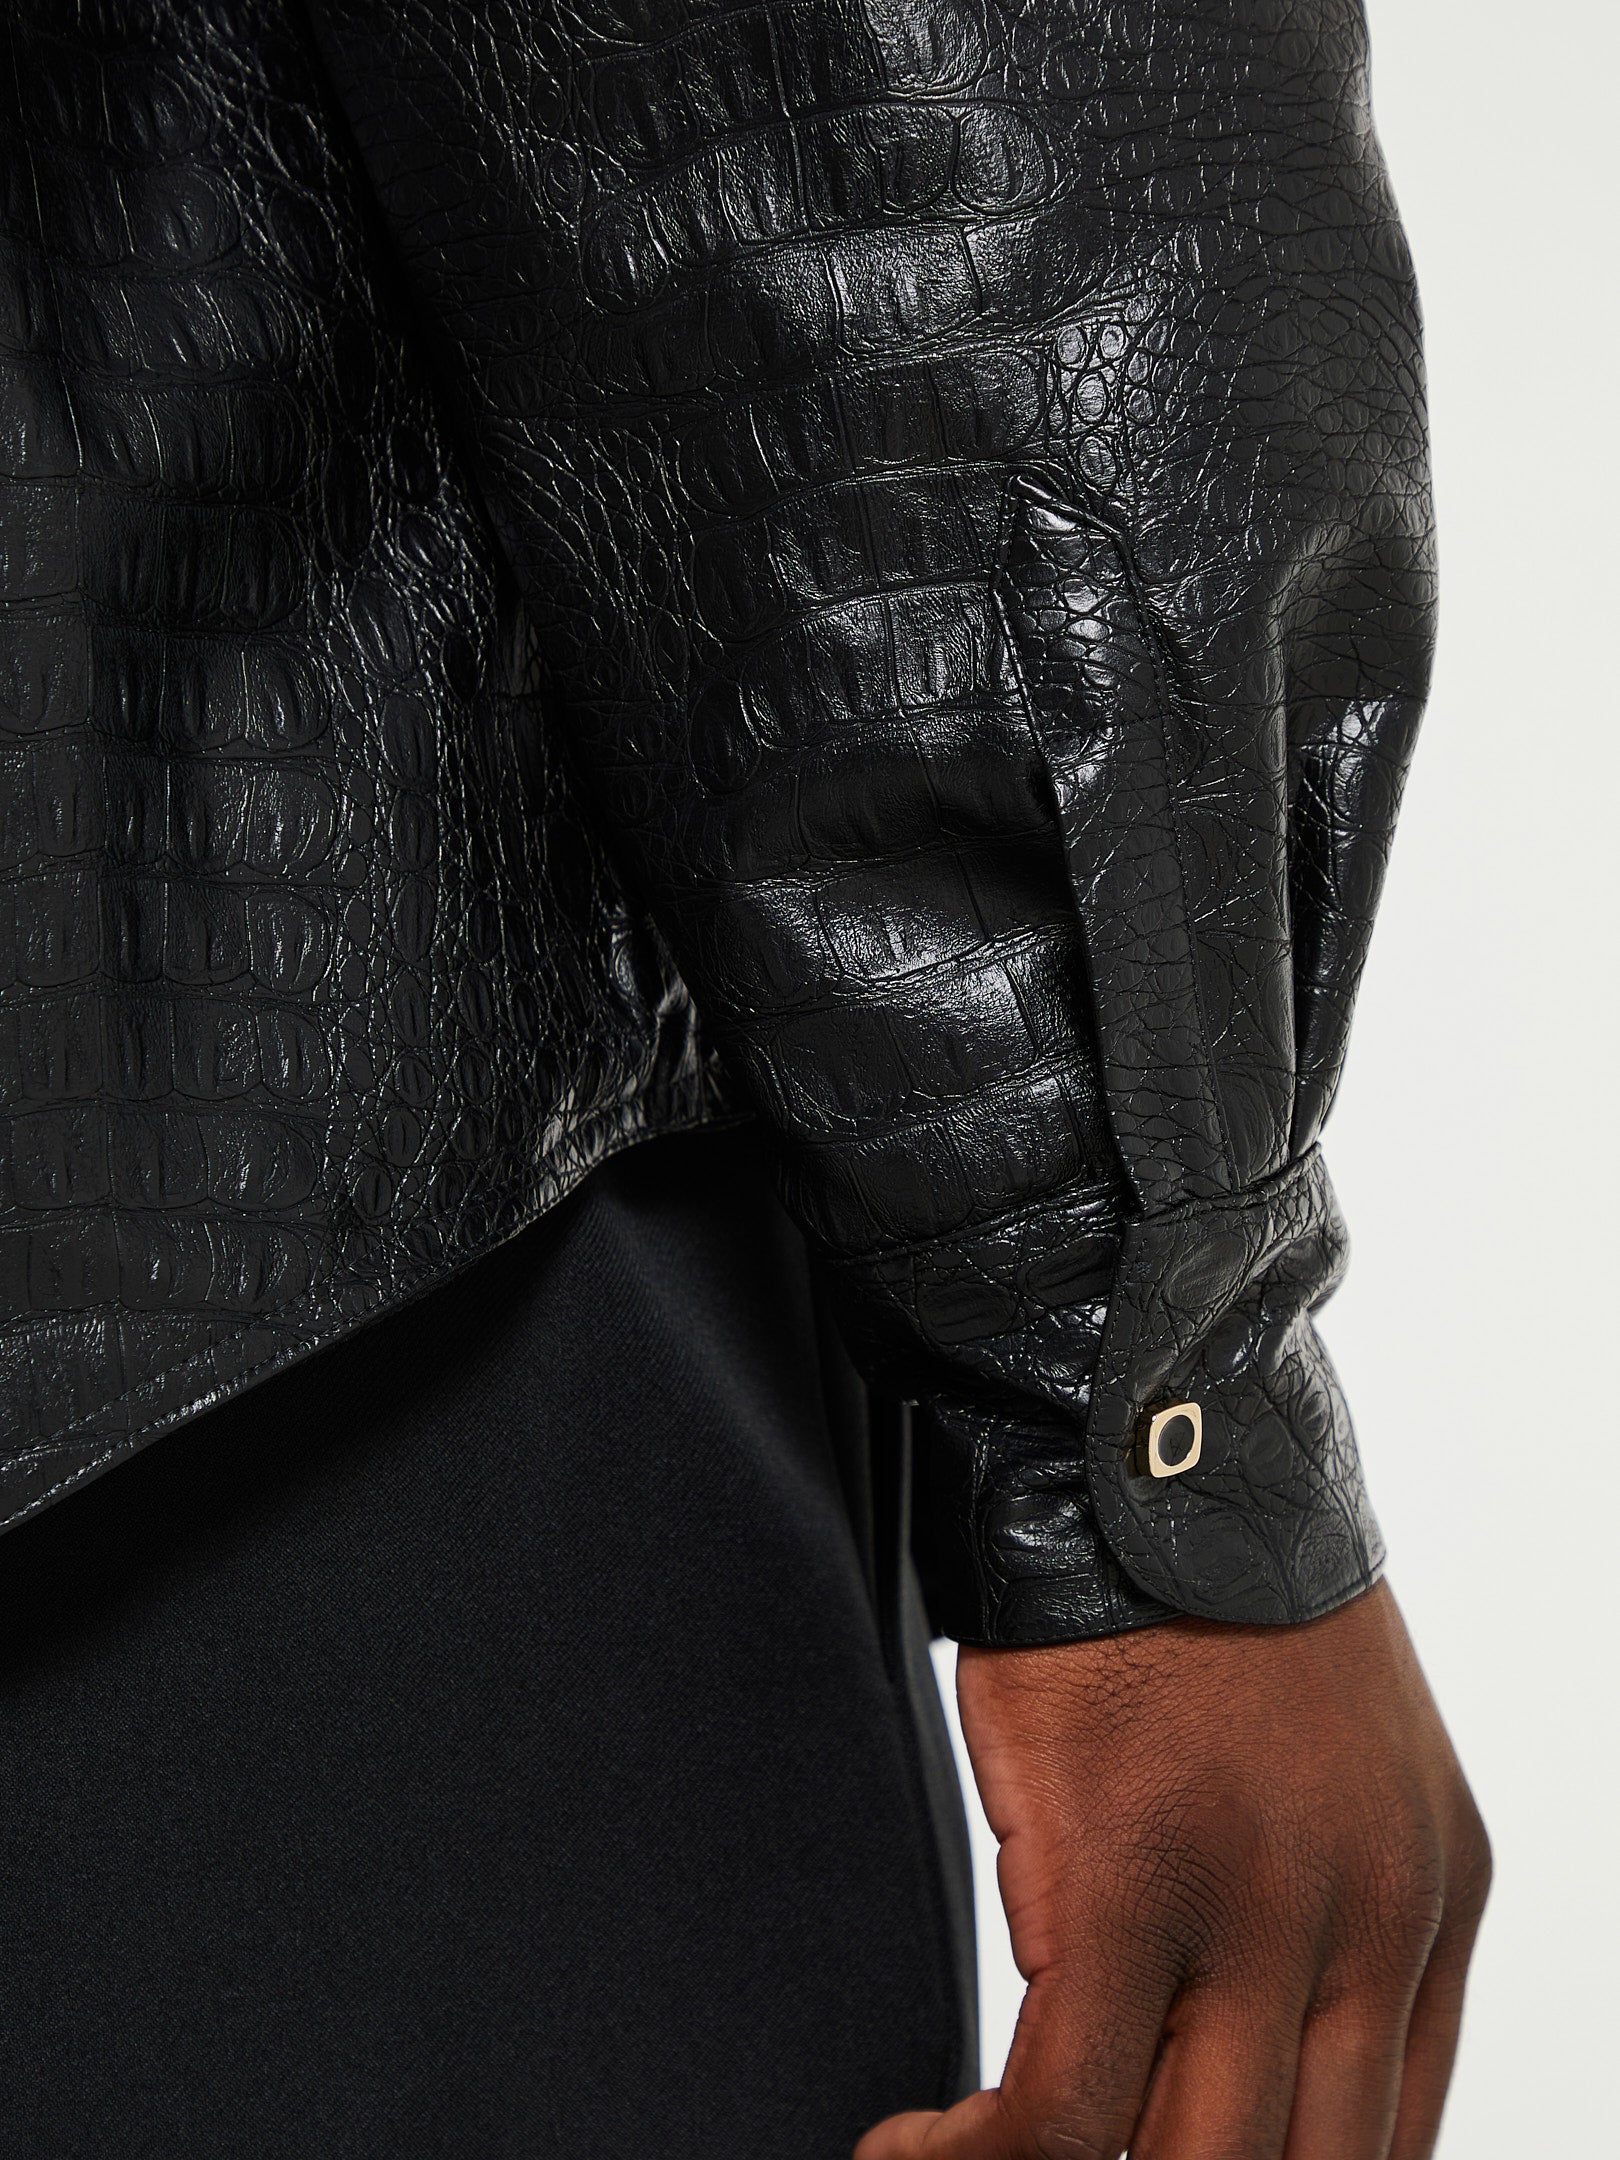 Shirt Quilted – Black 4SDesigns Jacket - in stoy